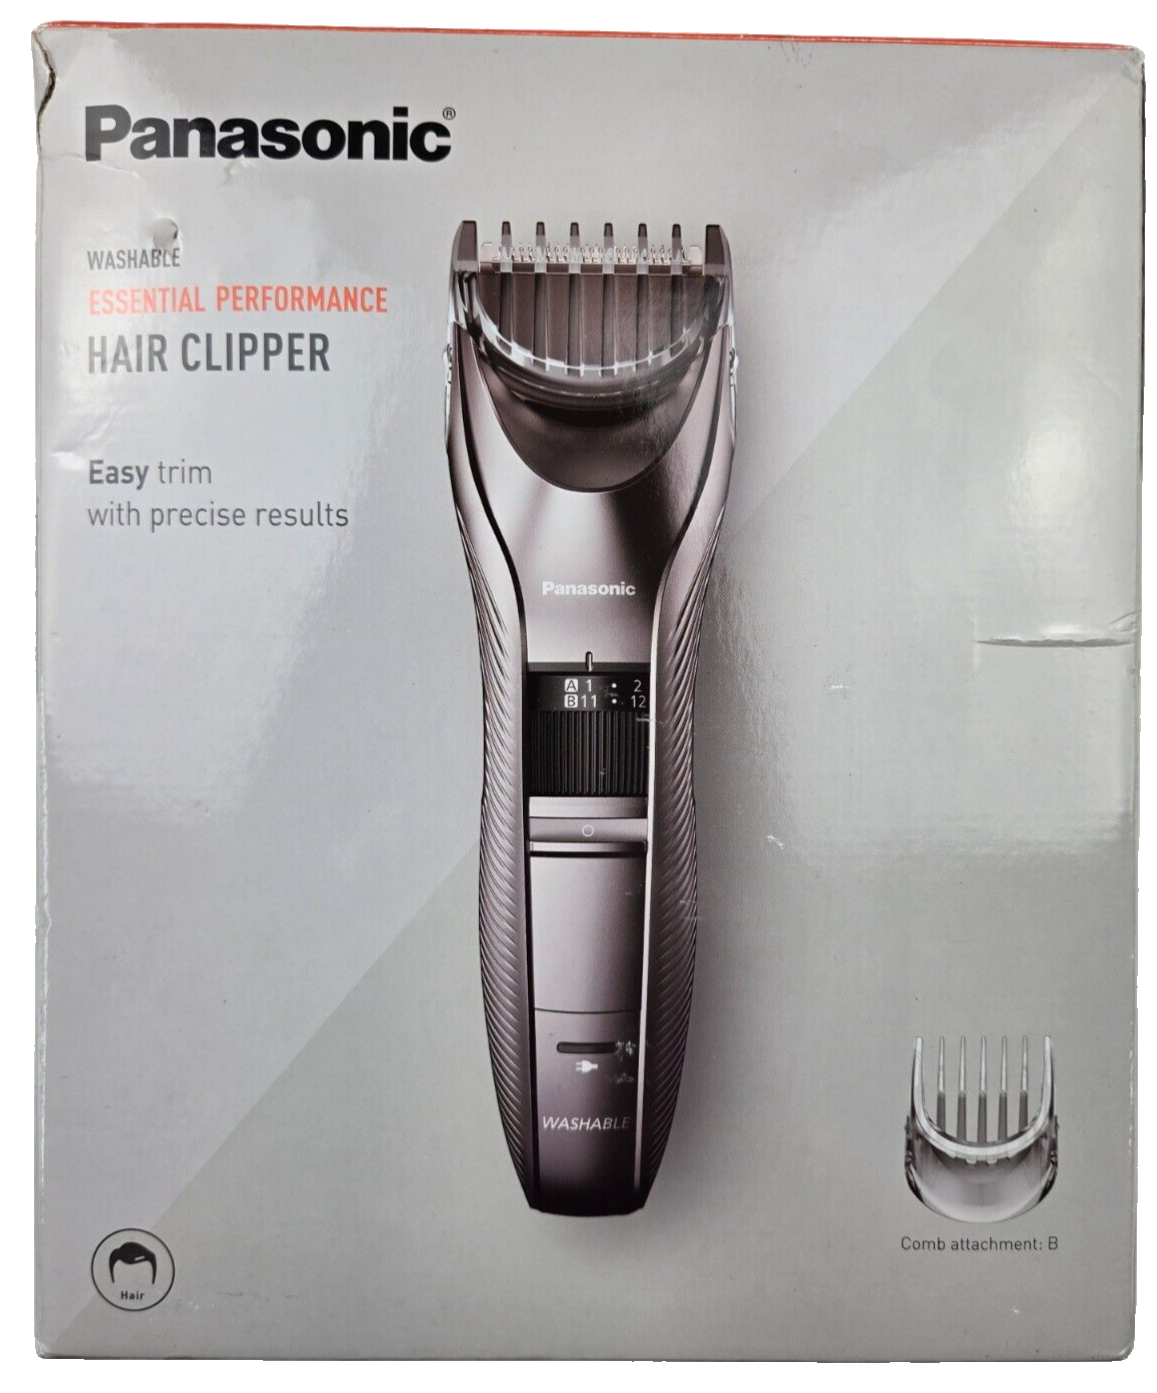 Panasonic Performance Hair Clippers with 2 Attachments and Adjustable Length Set - $49.50